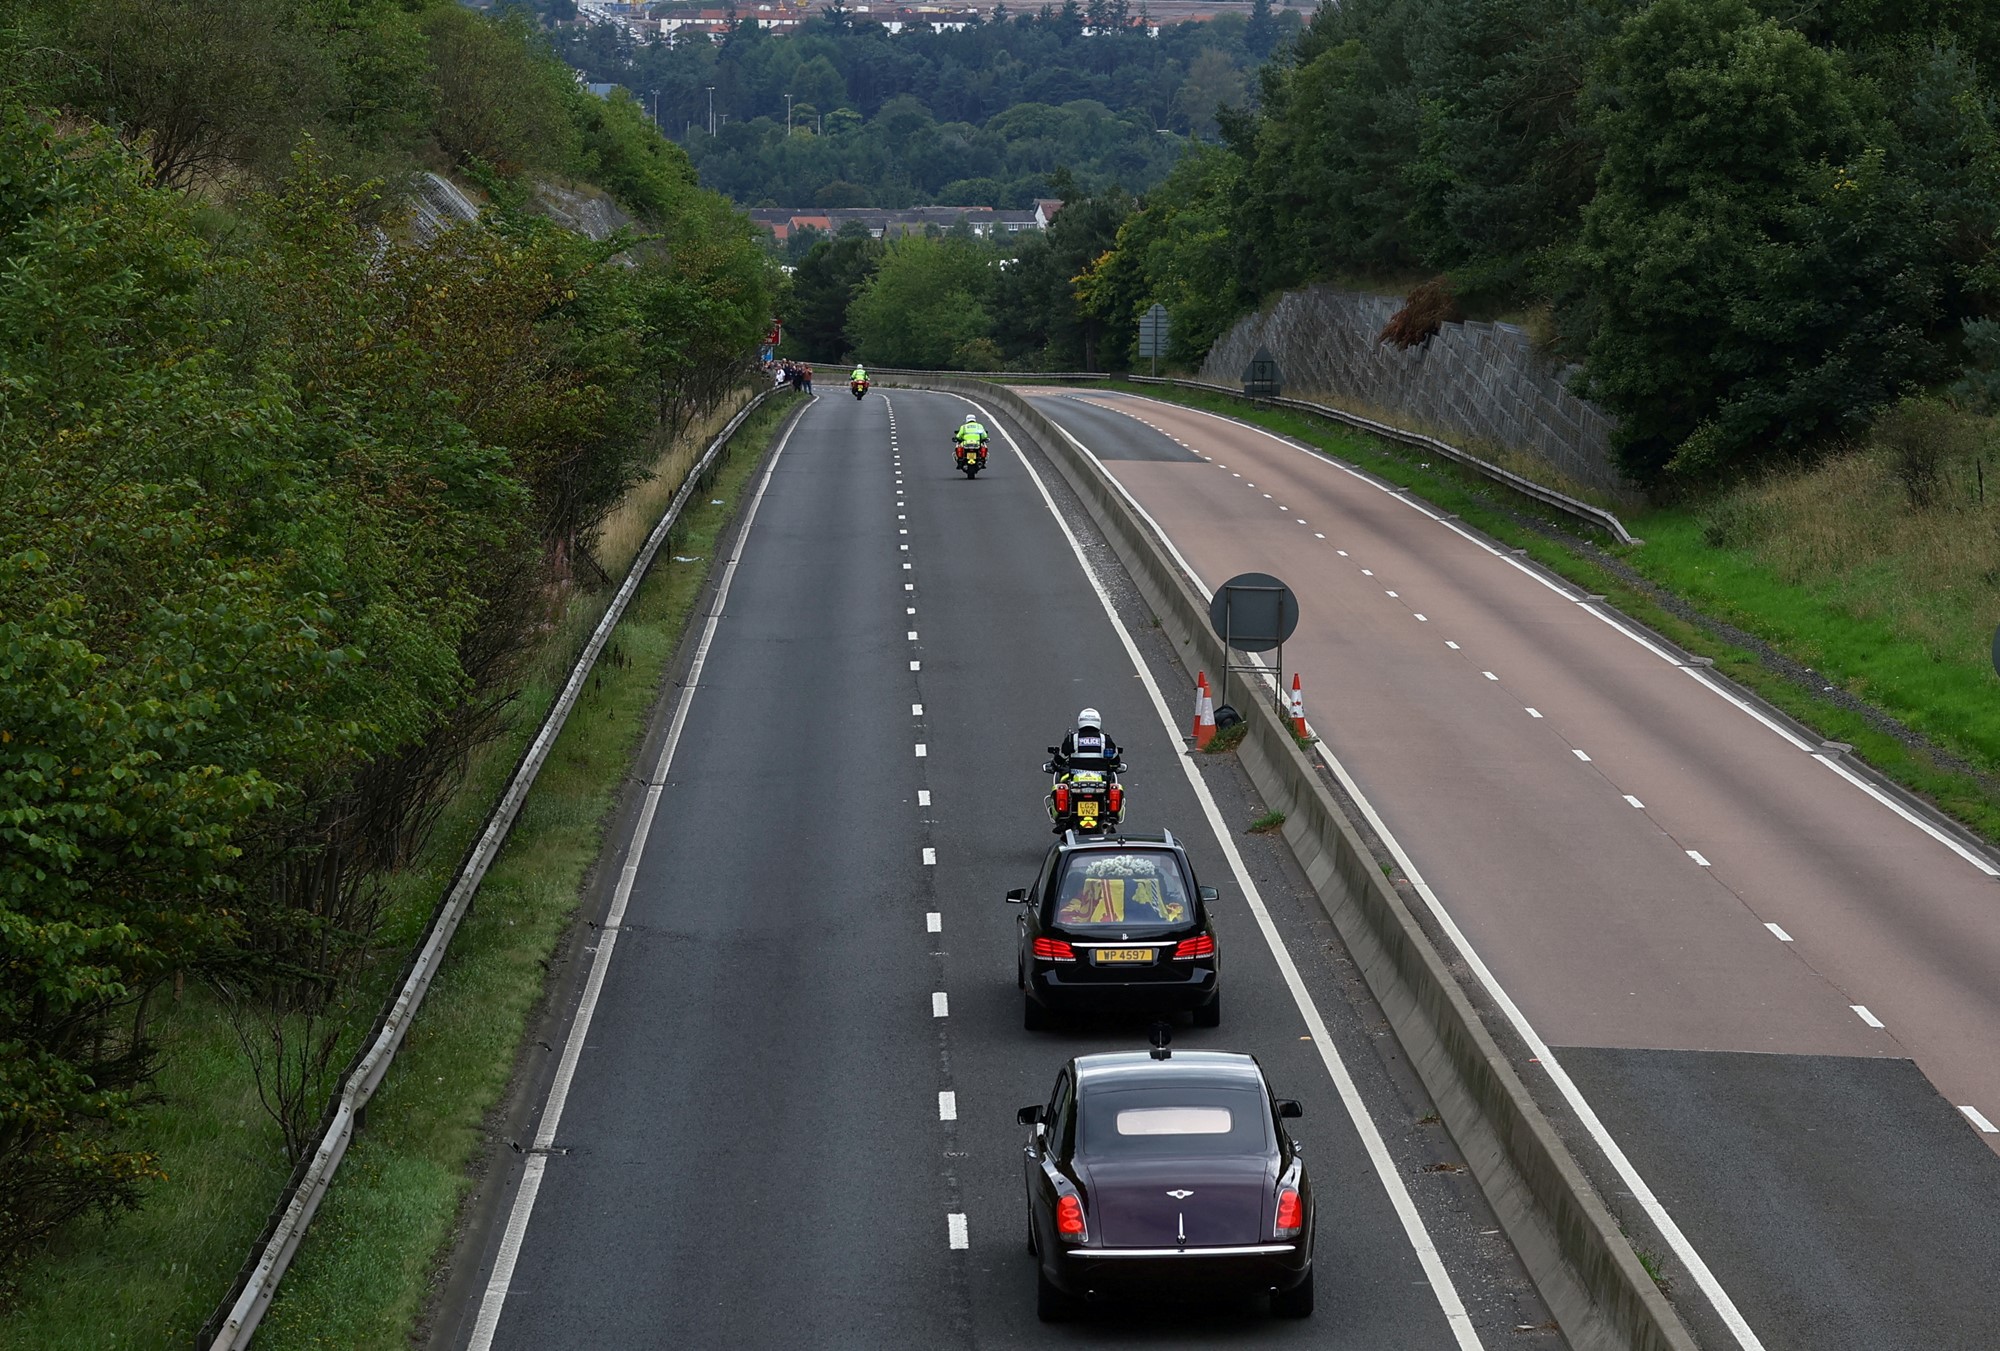 An empty highway is pictured with police on motorbikes, followed by a hearse and a black car.